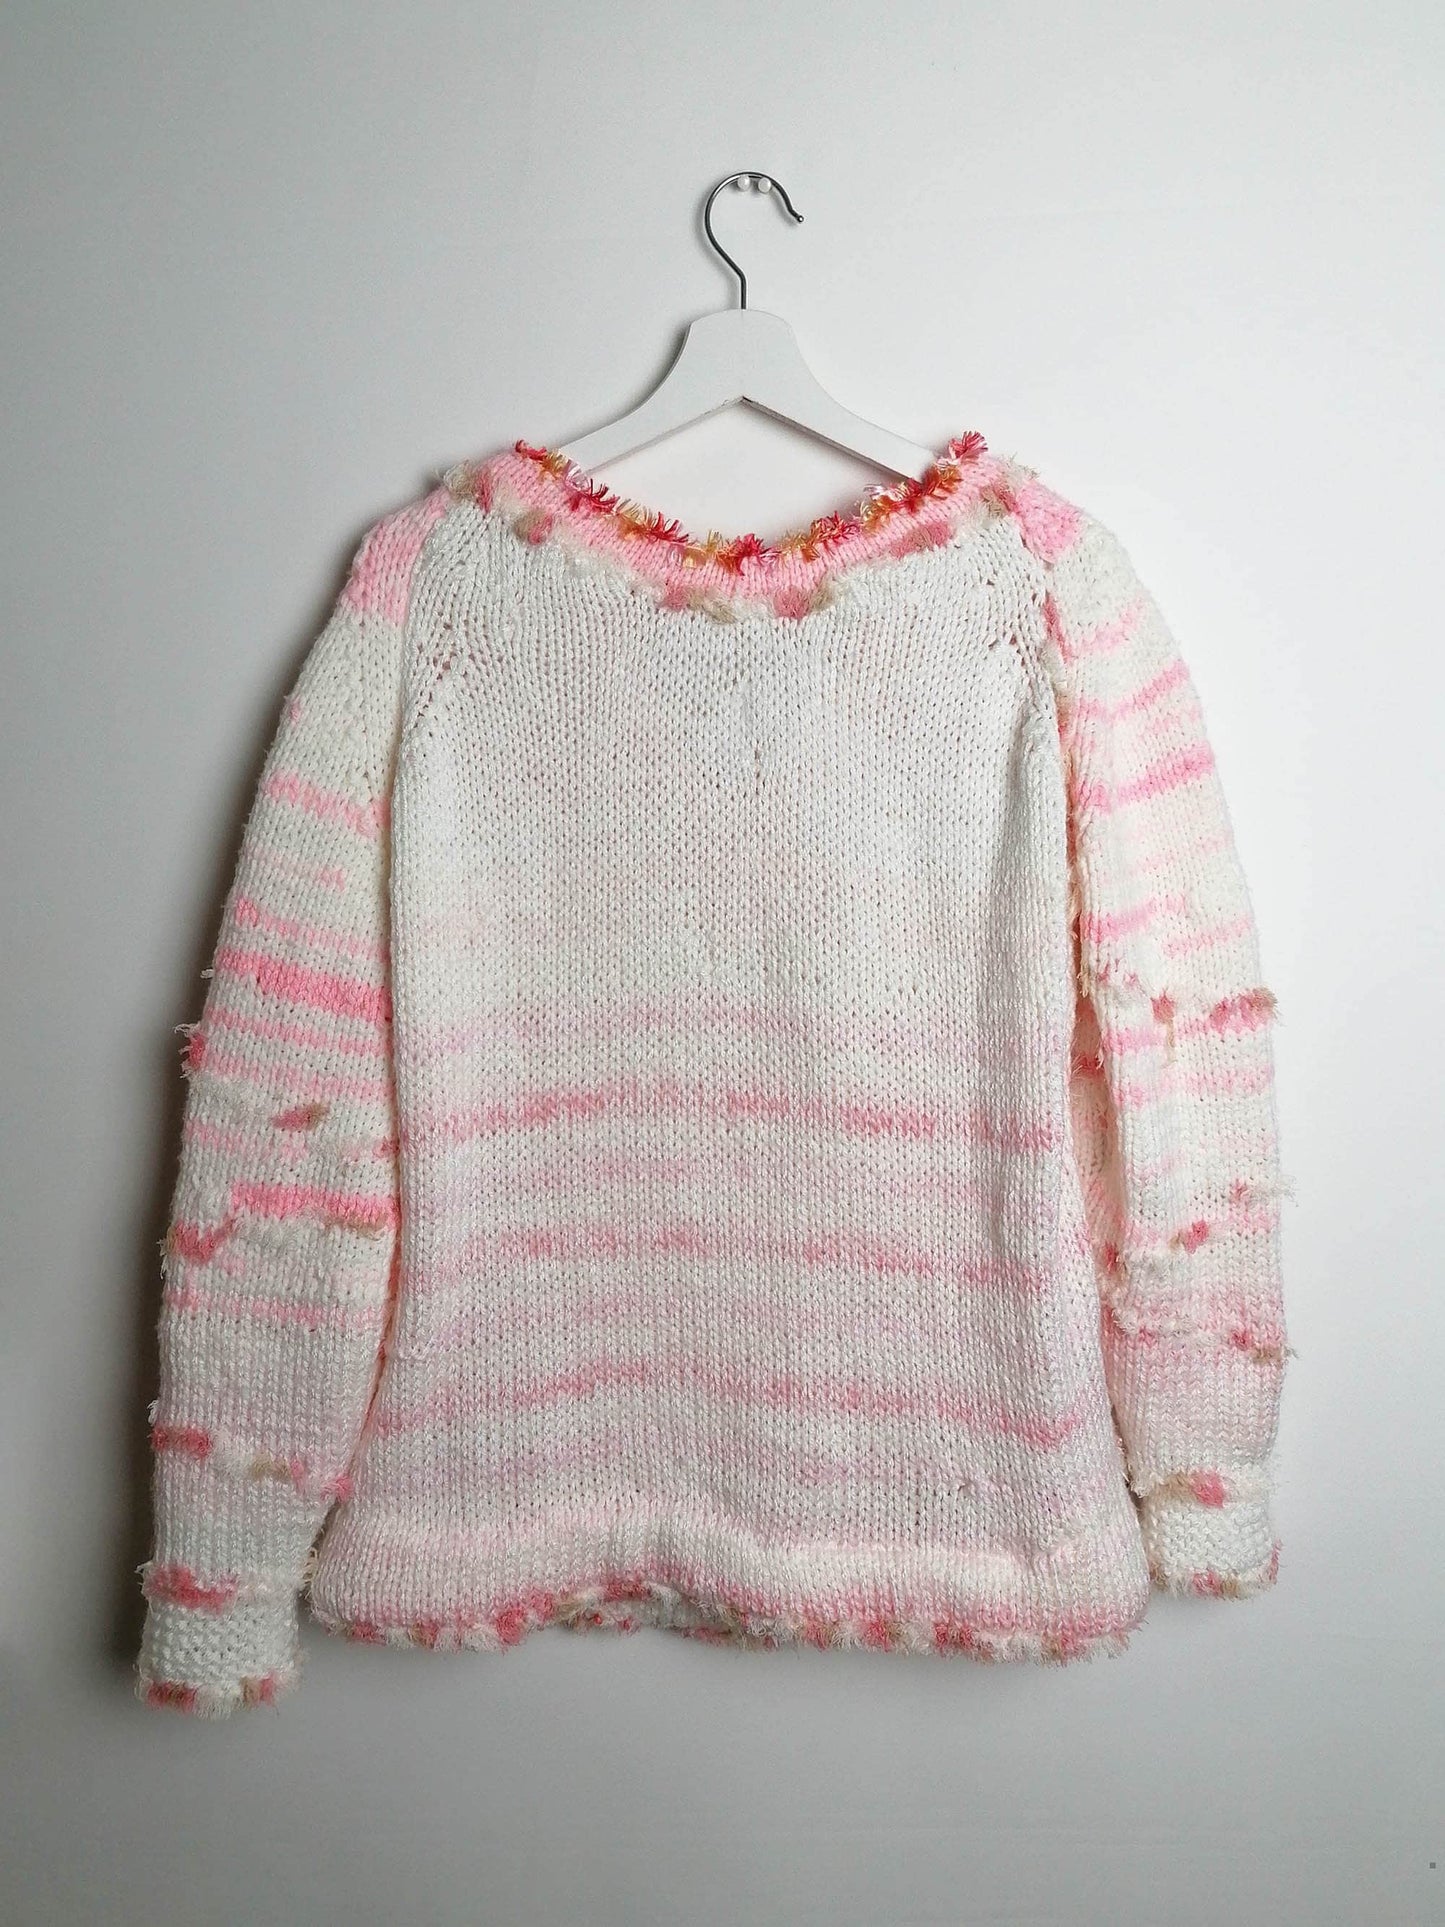 Handmade Fluffy Cotton Candy Sweater - size M-L